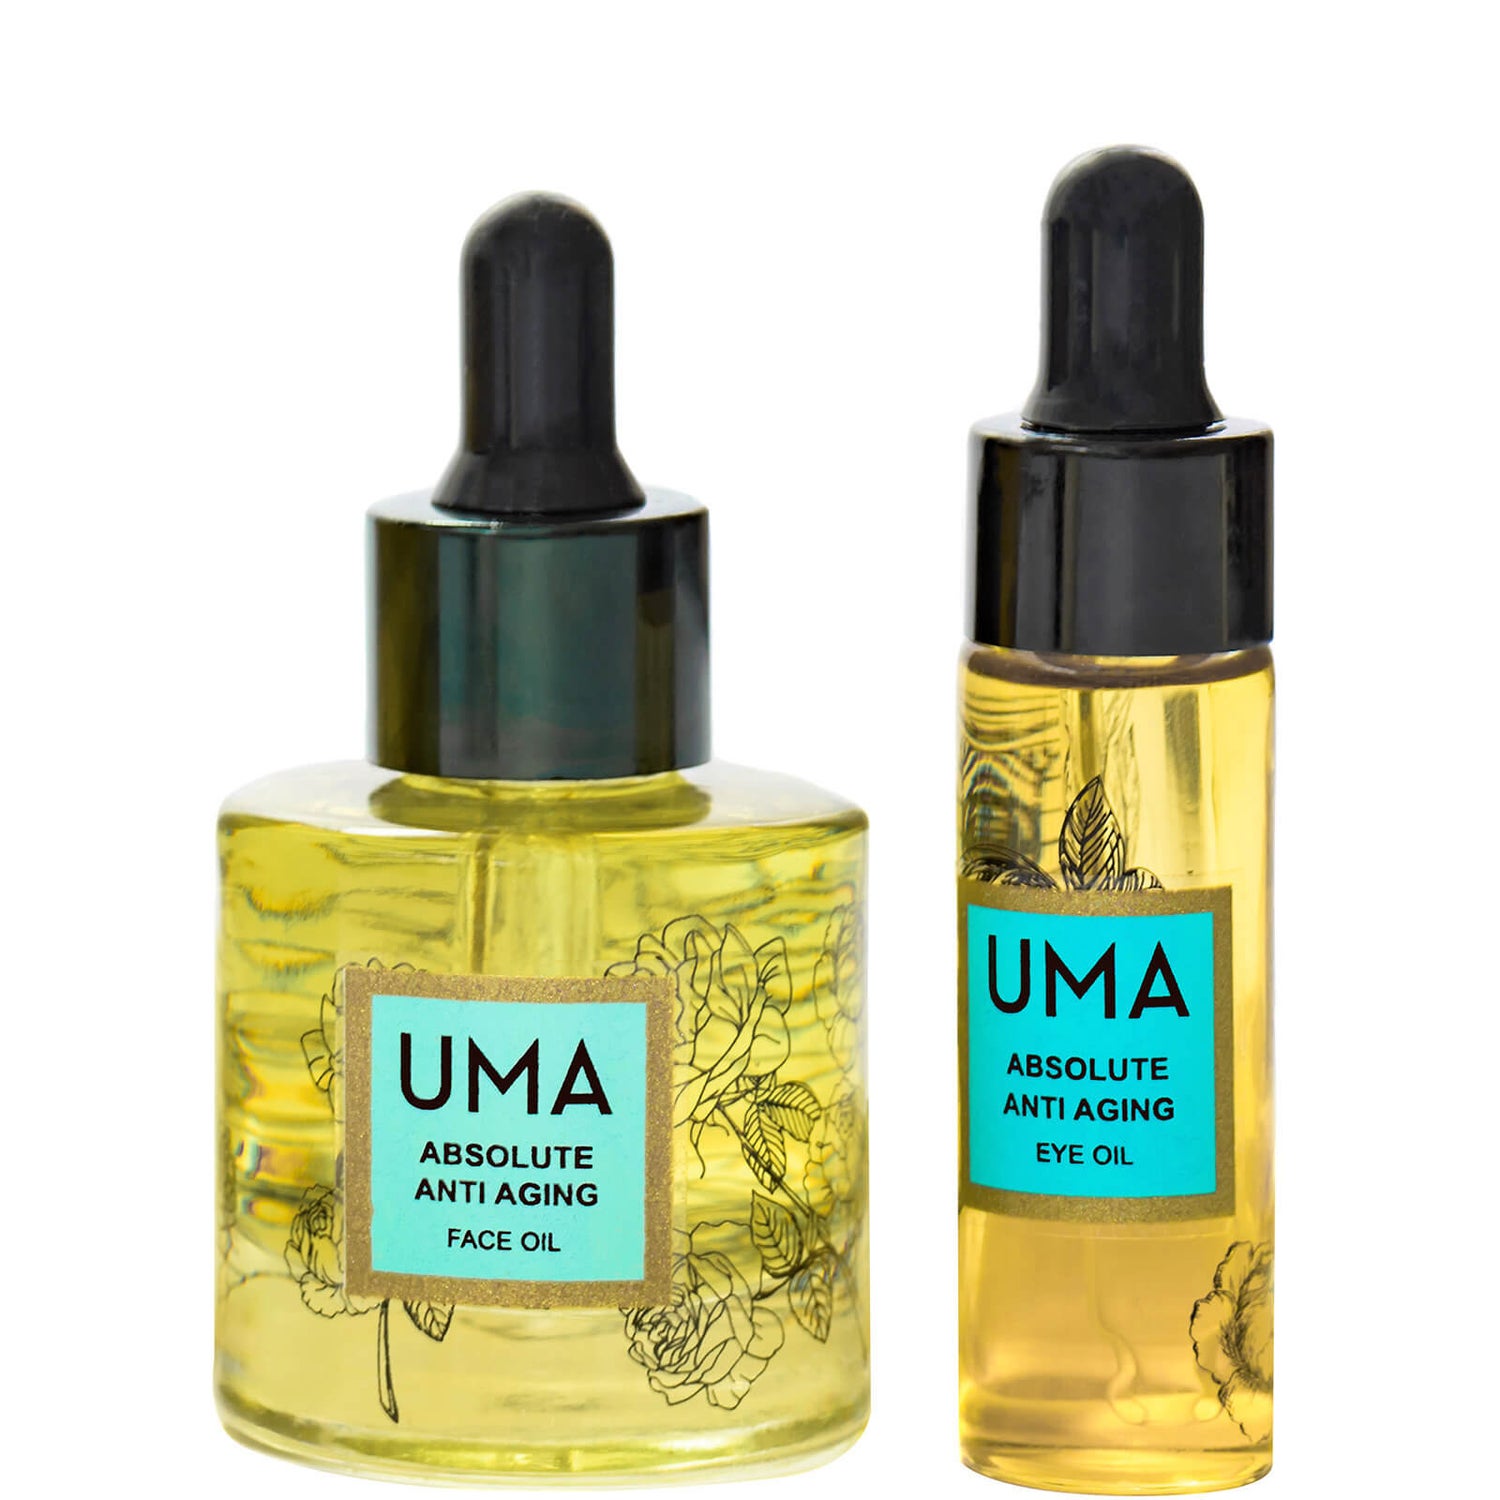 Uma Absolute Anti Aging Duo (Face Oil and Eye Oil)